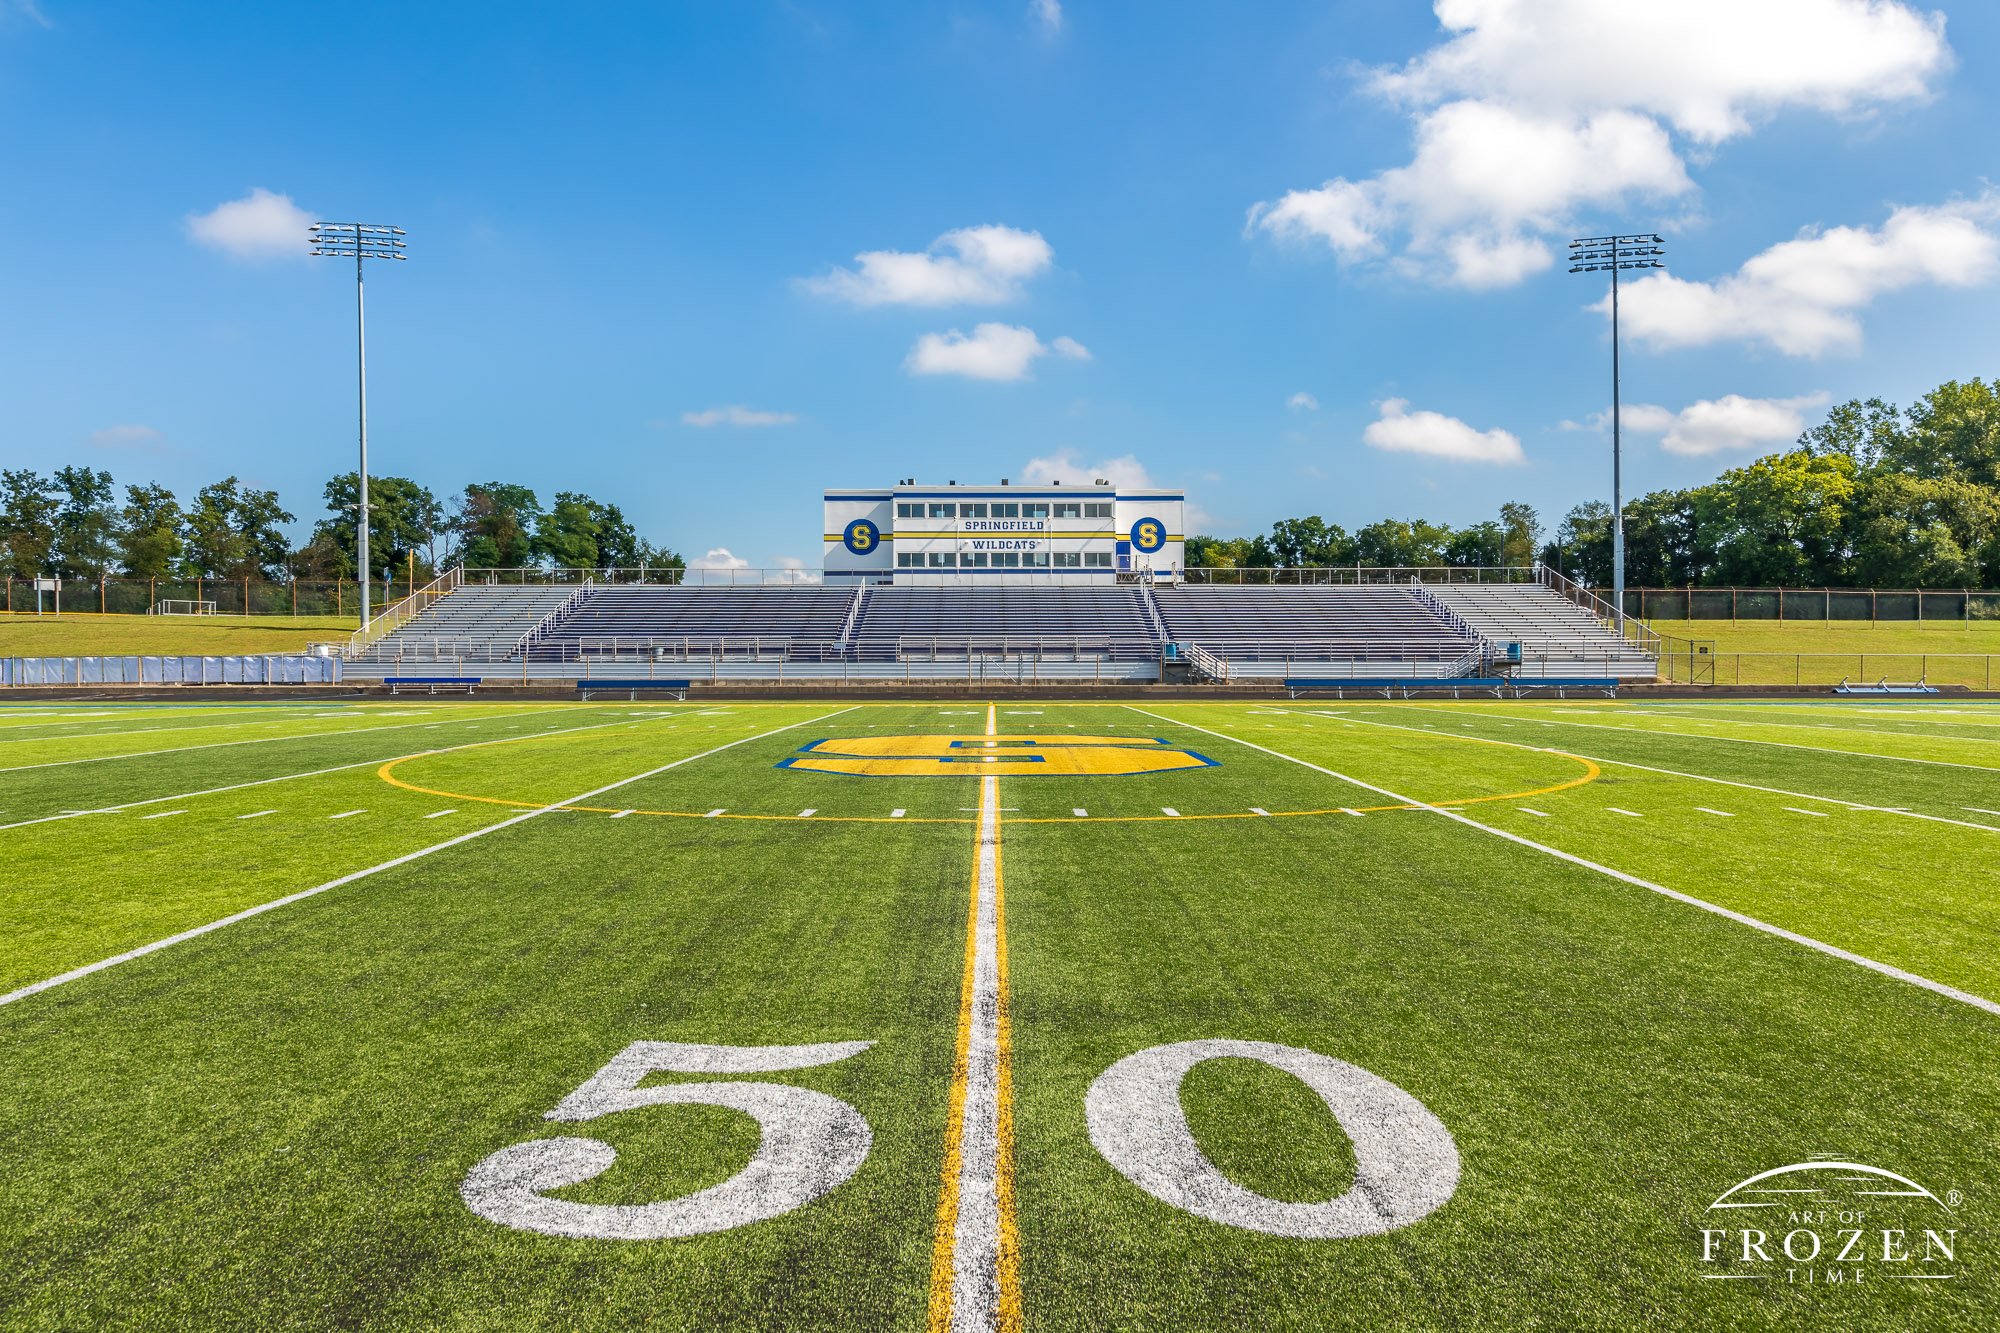 Wide angle views of Springfield Wildcat Stadium on a sunny day featuring artificial turf and the school’s blue and yellow colors.